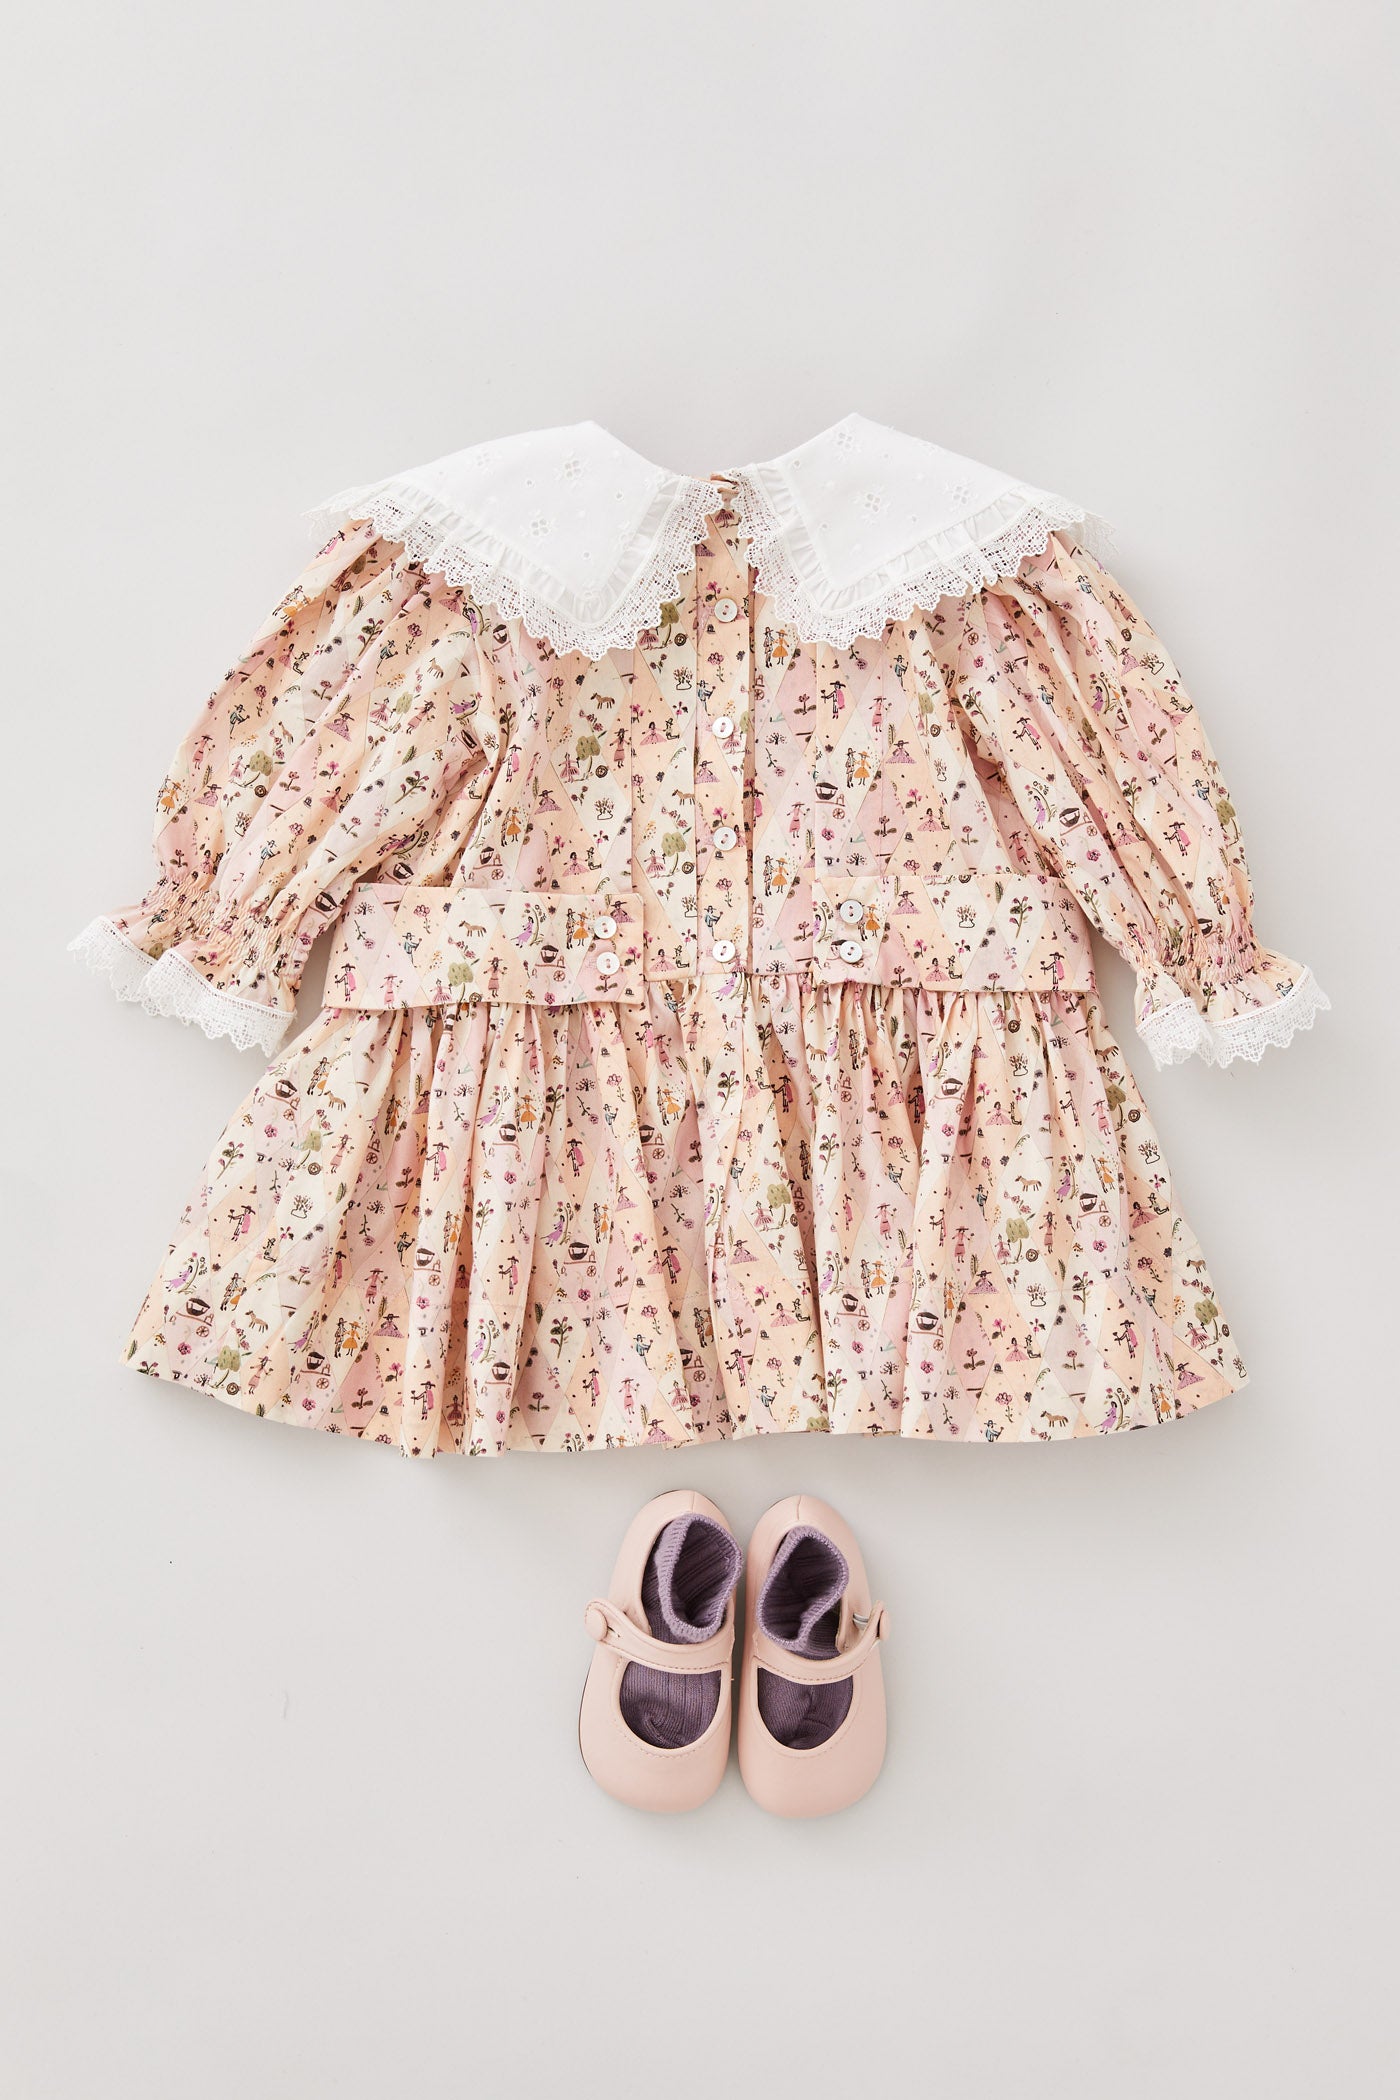 Baby Piano Dress in Picnic Love Liberty Print - Designed by Ingrid Lewis - Strawberries & Cream